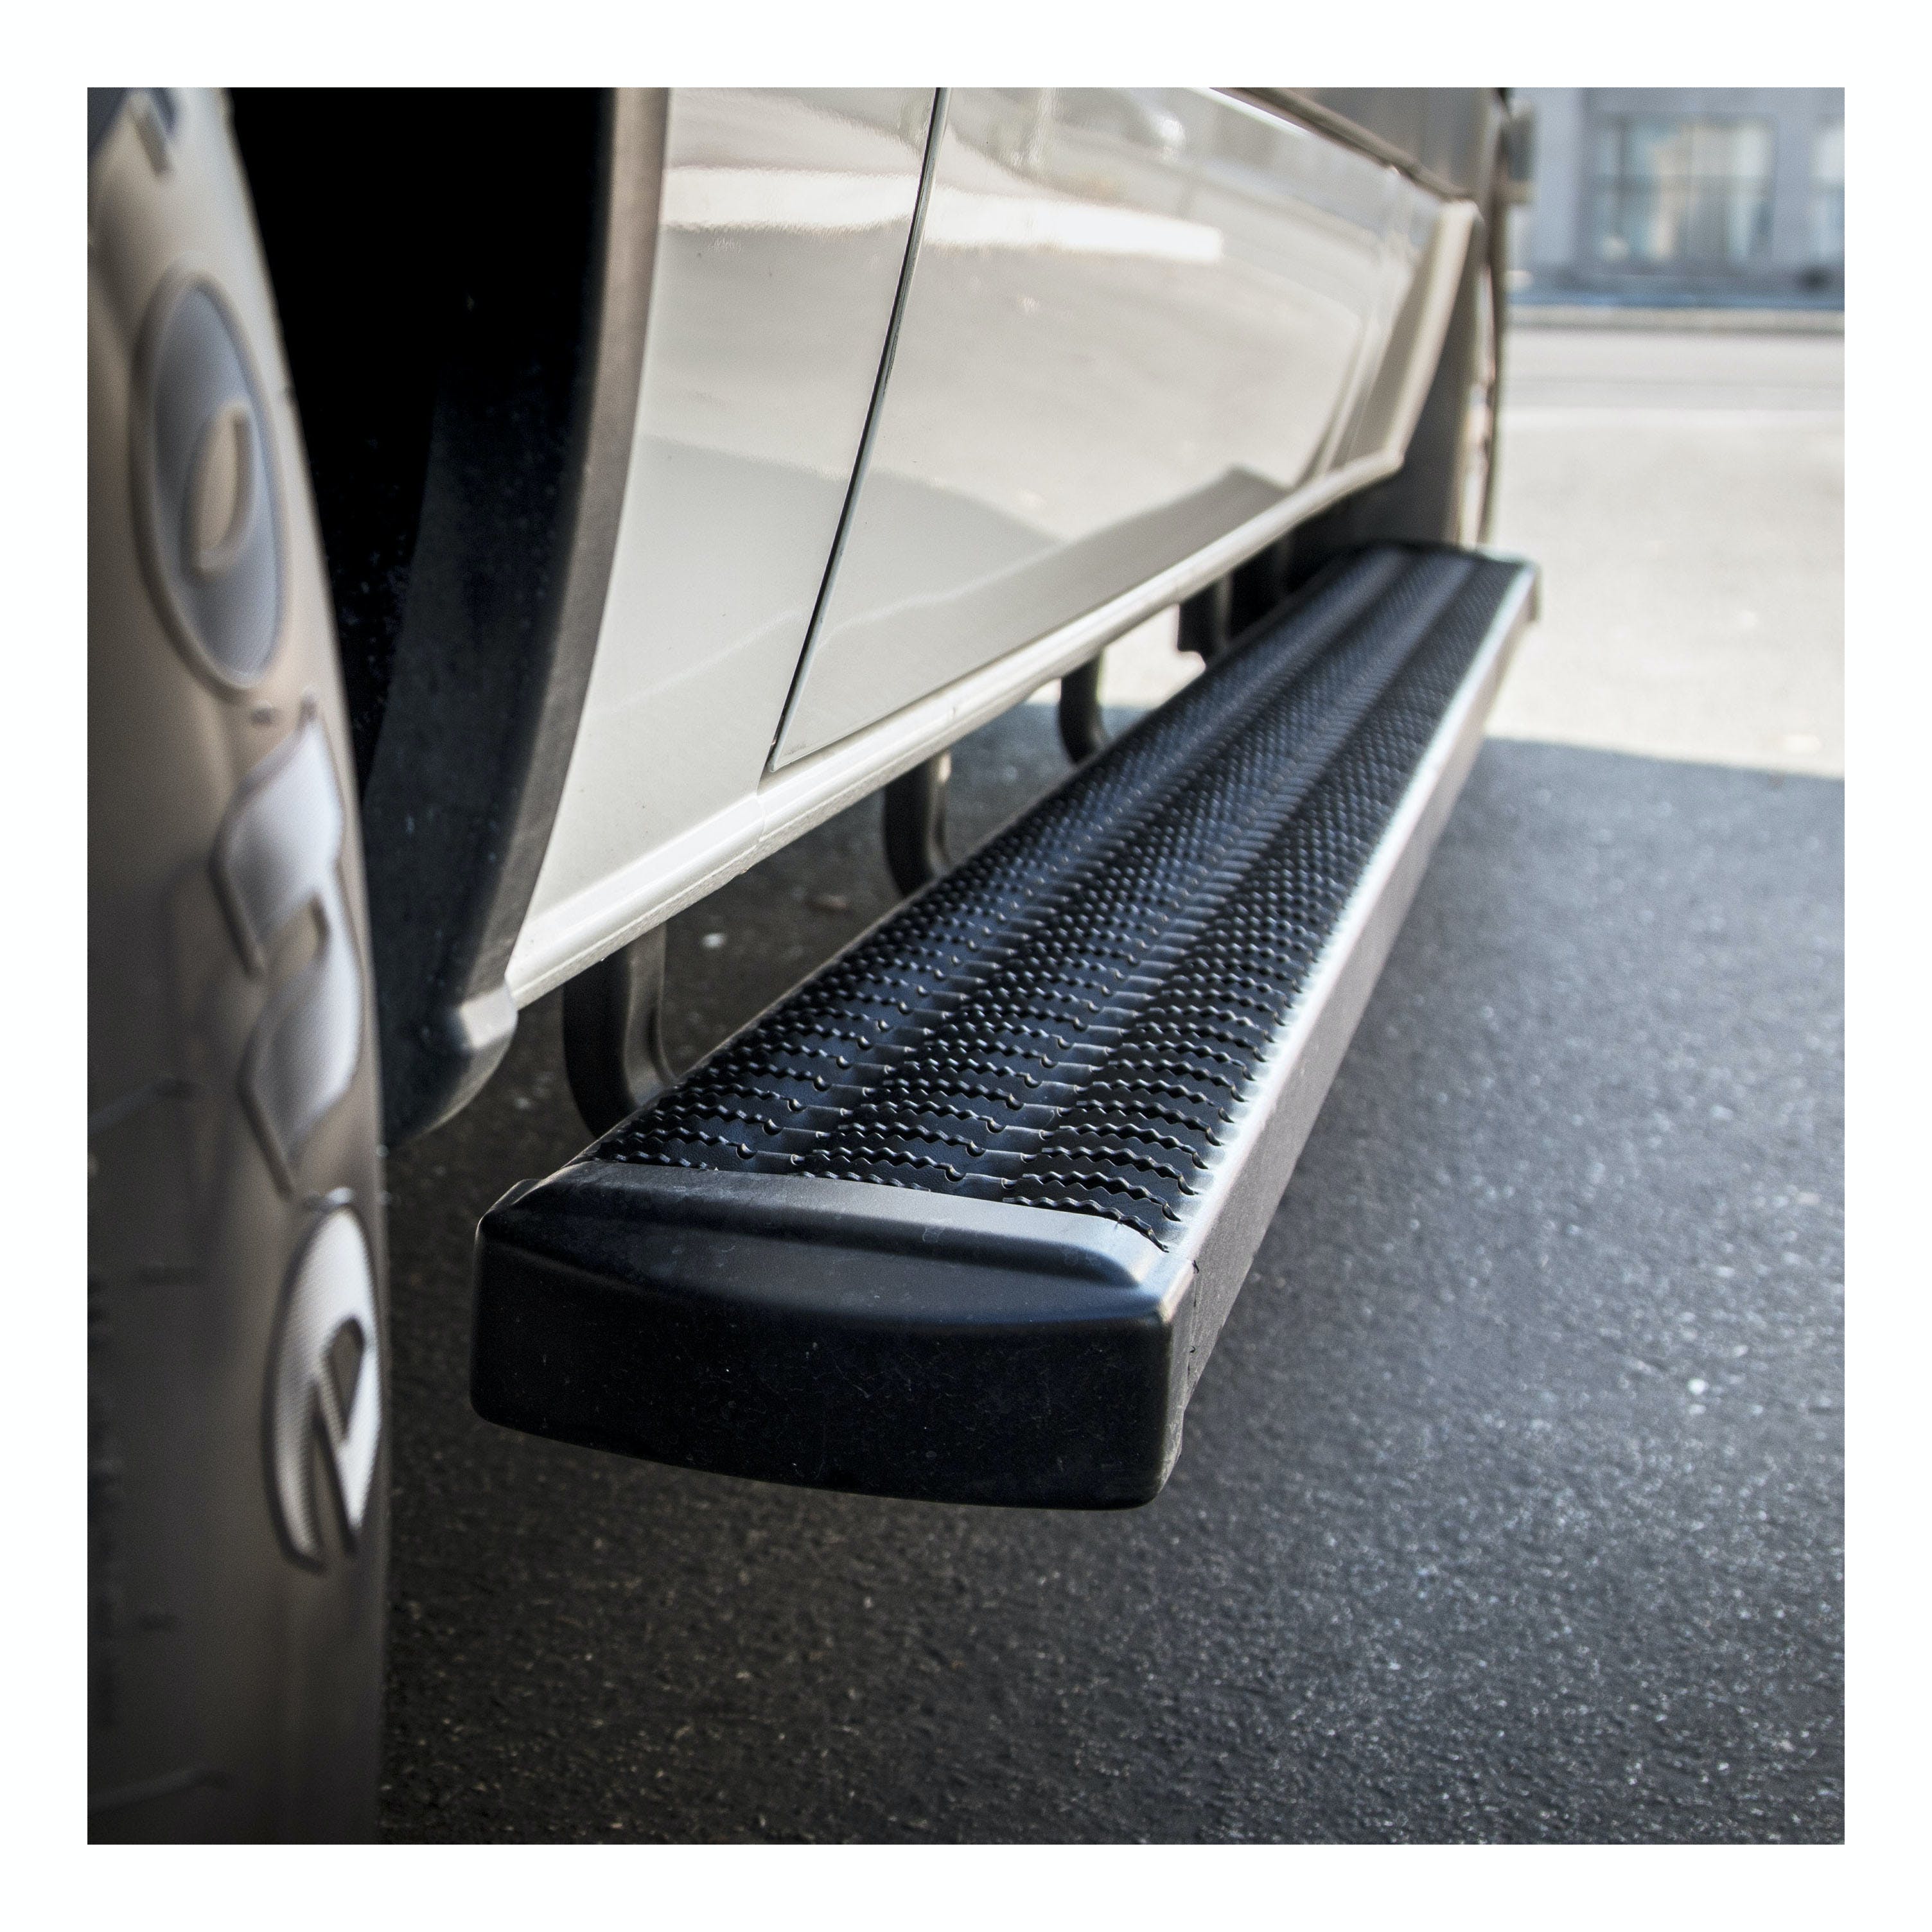 LUVERNE 415060 Grip Step 7 inch Running Boards